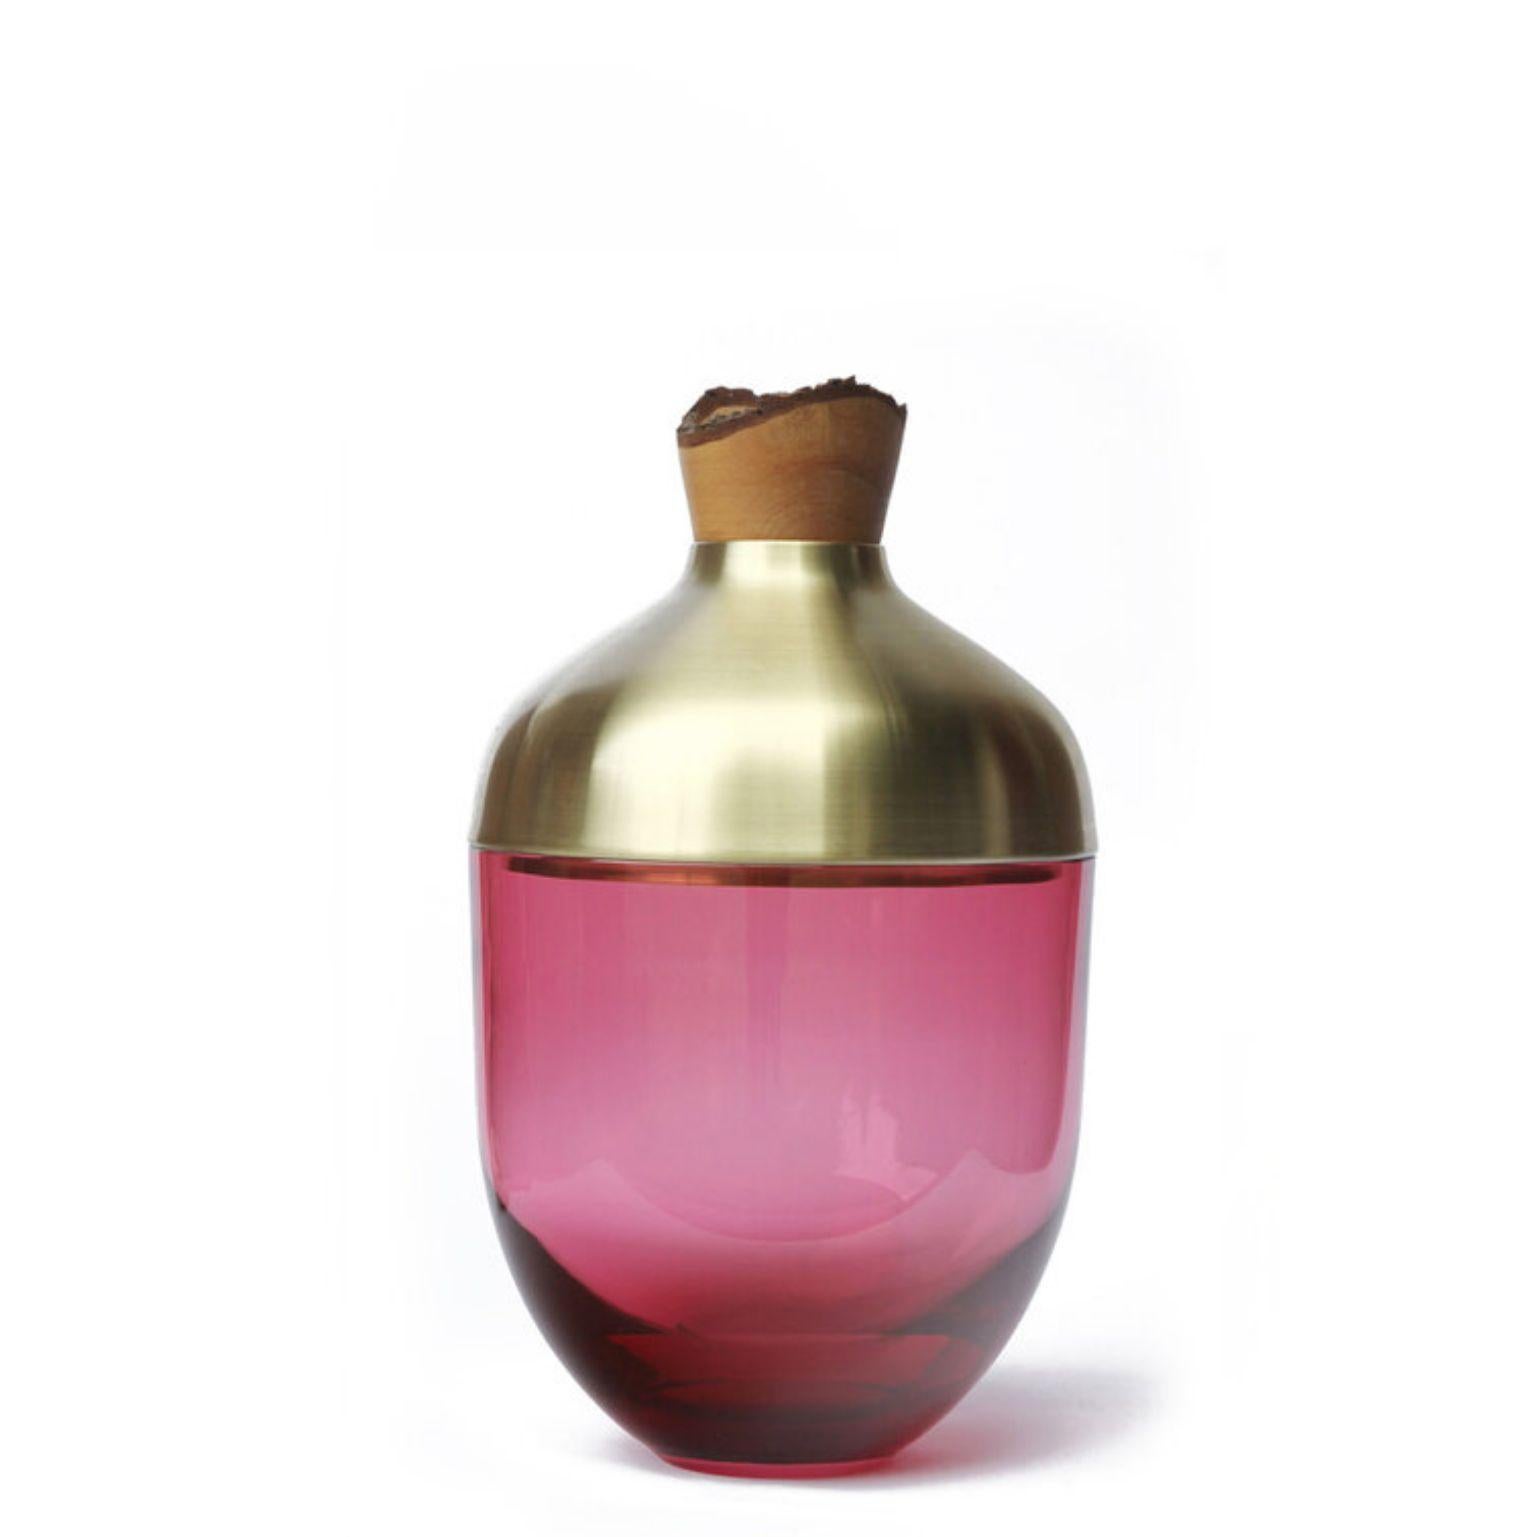 Sculpted blown glass and brass vase - Pia Wüstenberg
Dimensions: Height 55 x diameter 30cm
Both rough and refined, this assortment plays with the multiple metamorphosis glass grants as a material. The glass is first hand blown, and then cold